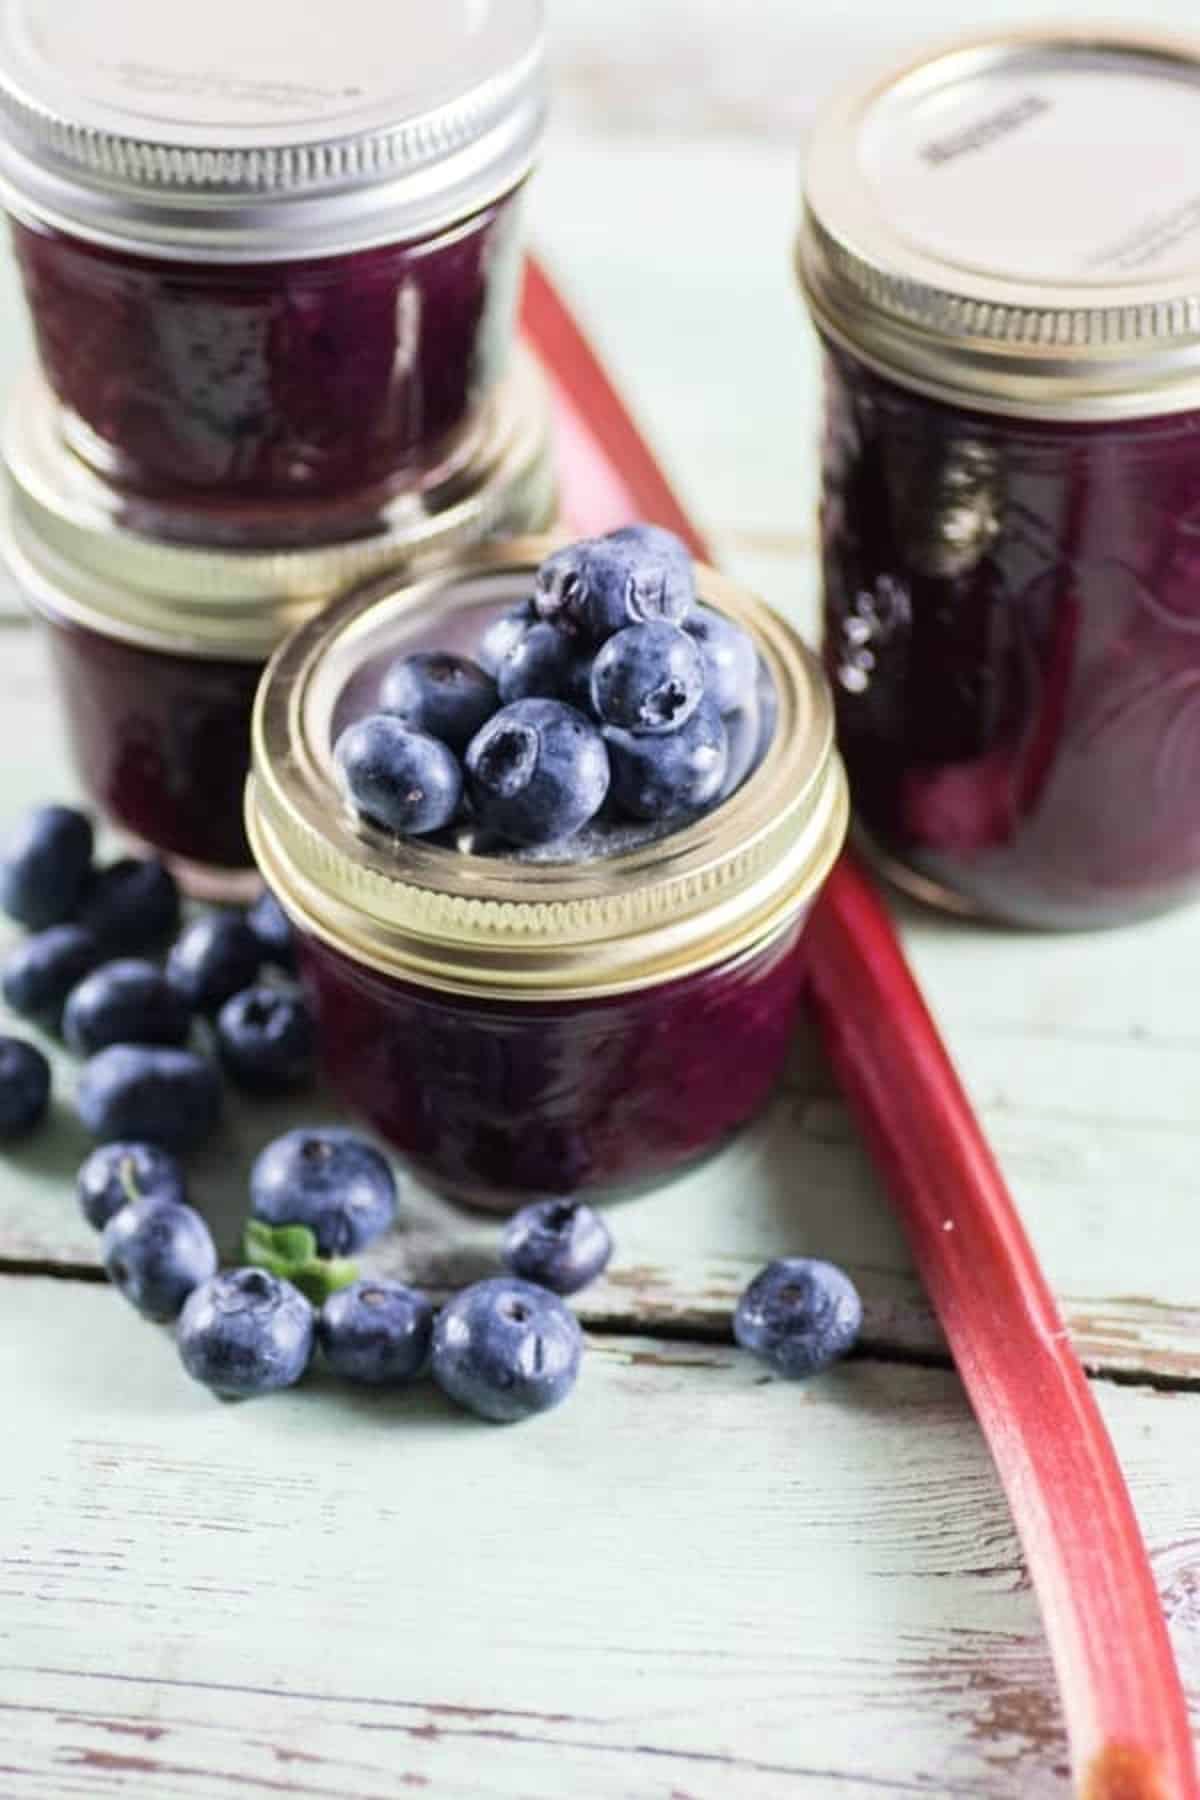 Blueberry Rhubarb Jam in jars with fresh blueberries and rhubarb.